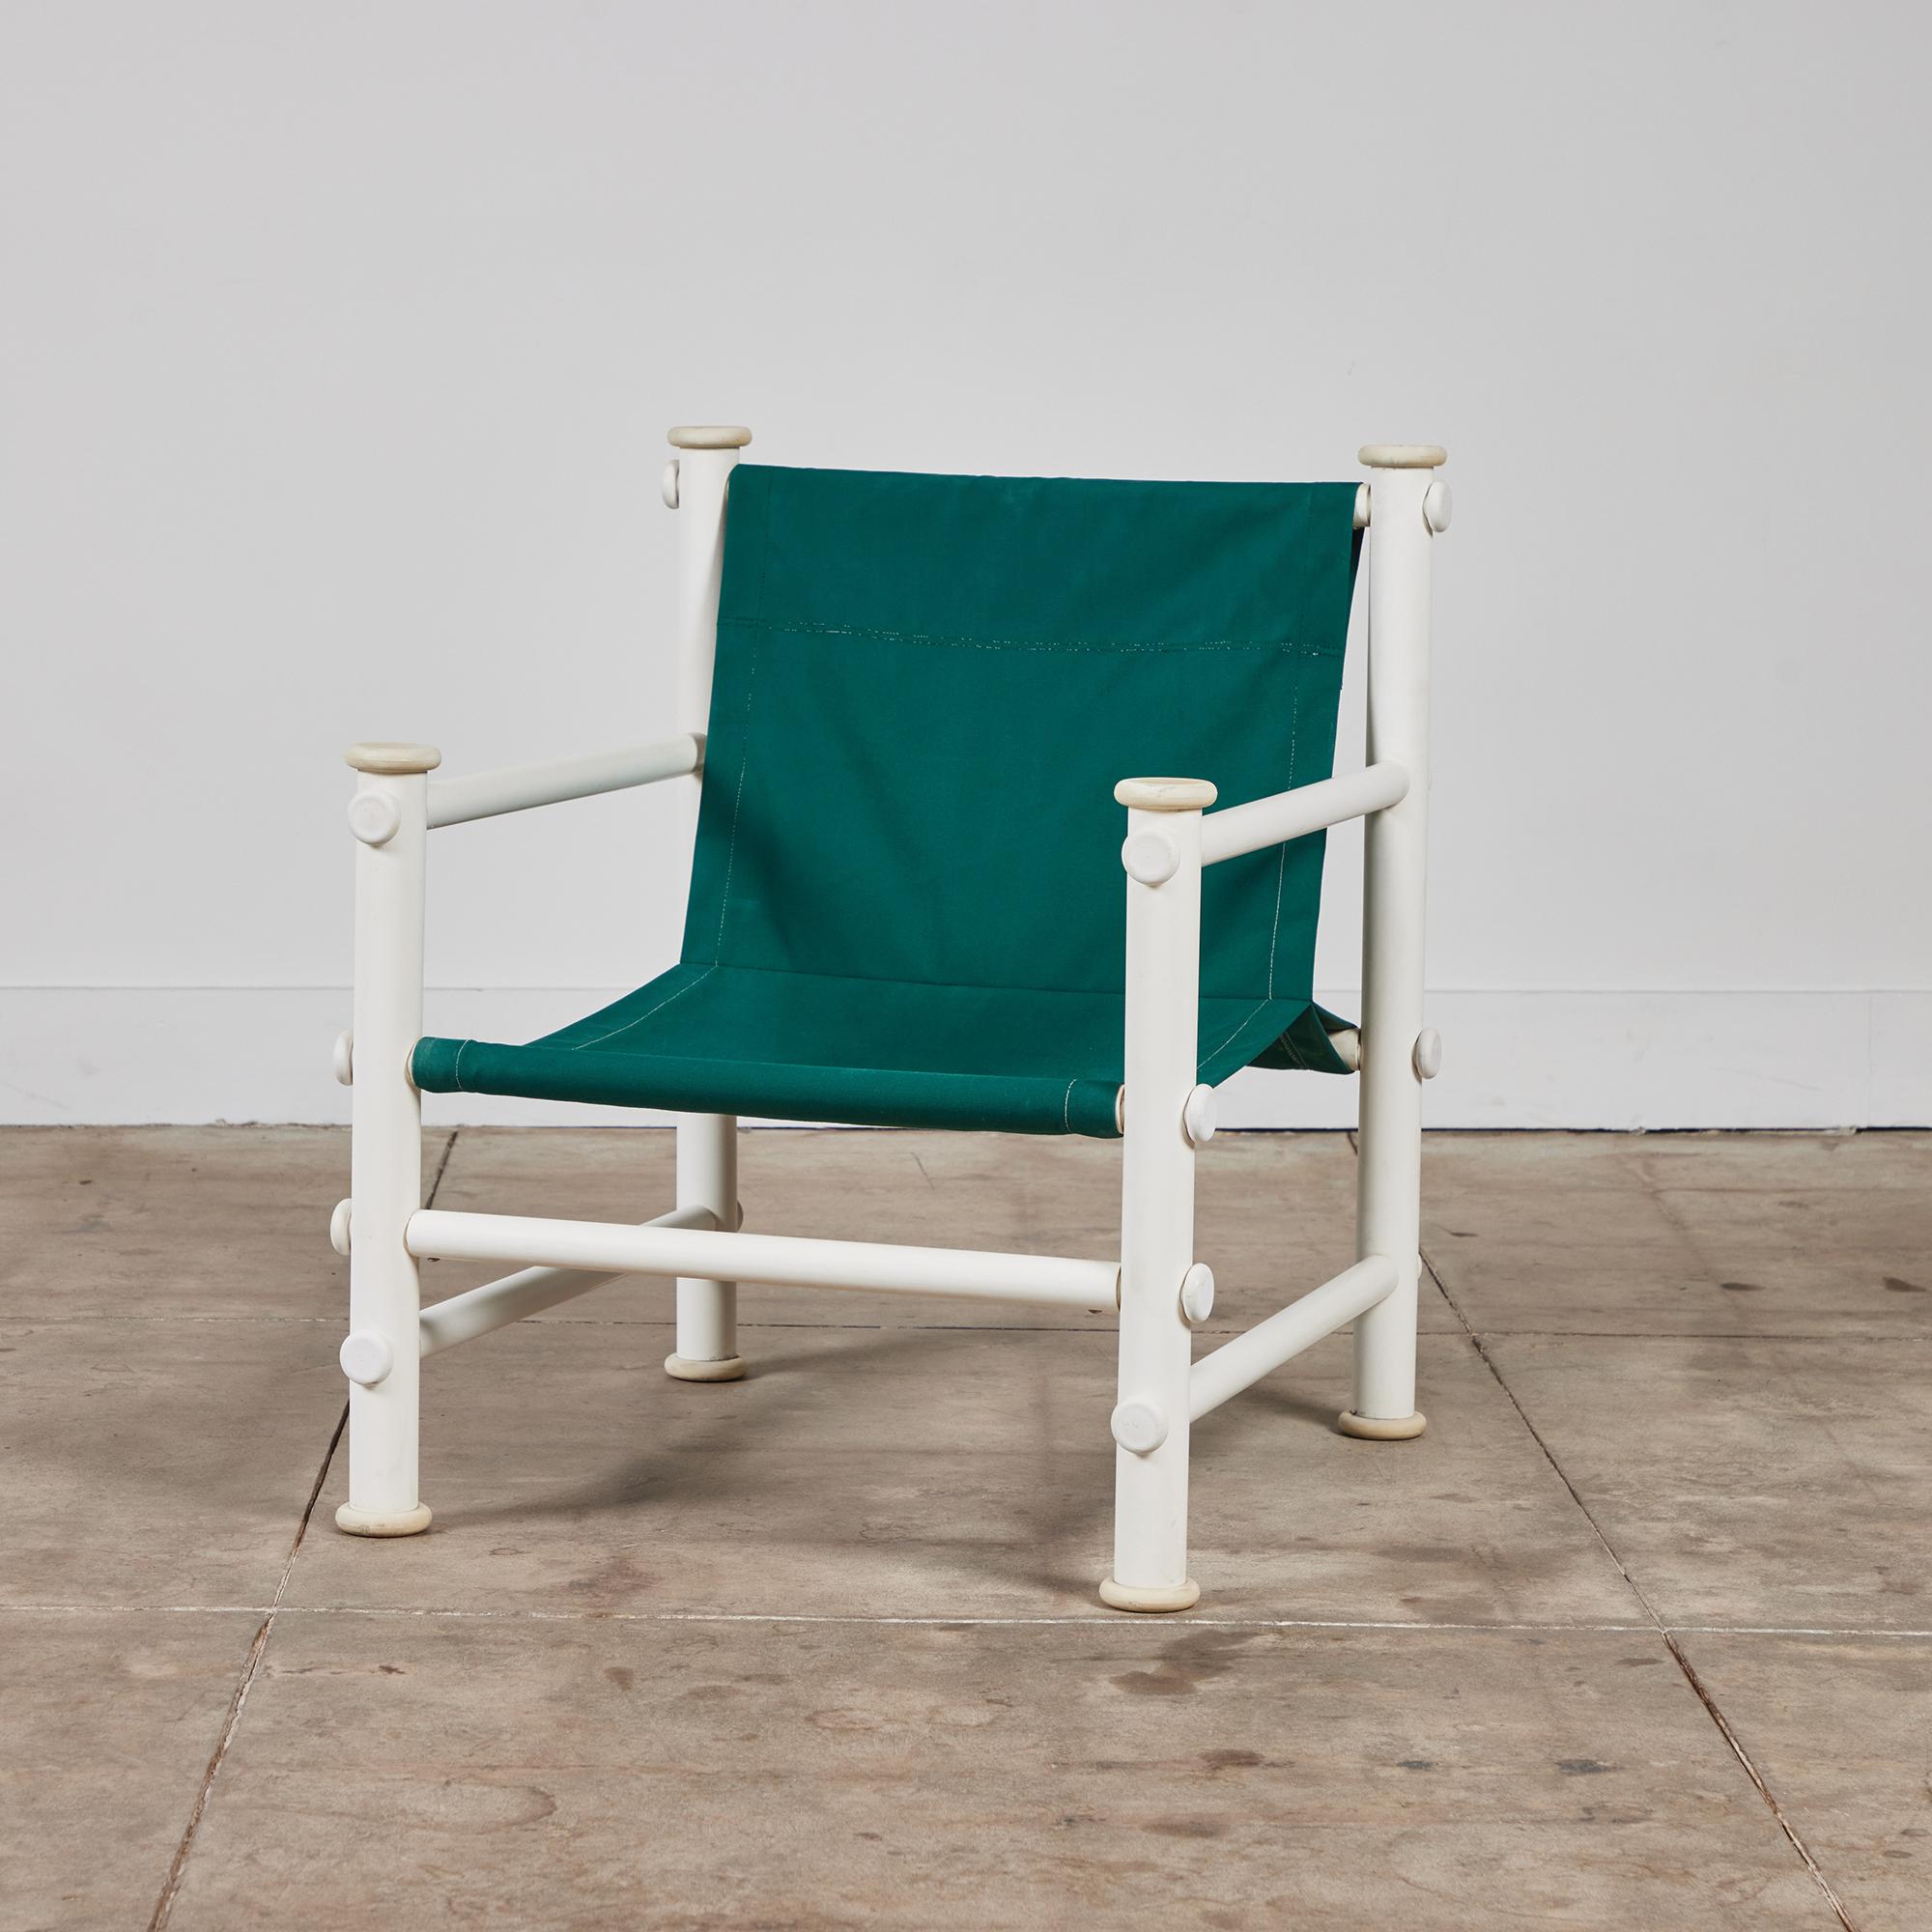 California-made lounge chairs by Jerry Johnson for Landes Inc., c.1968. The 